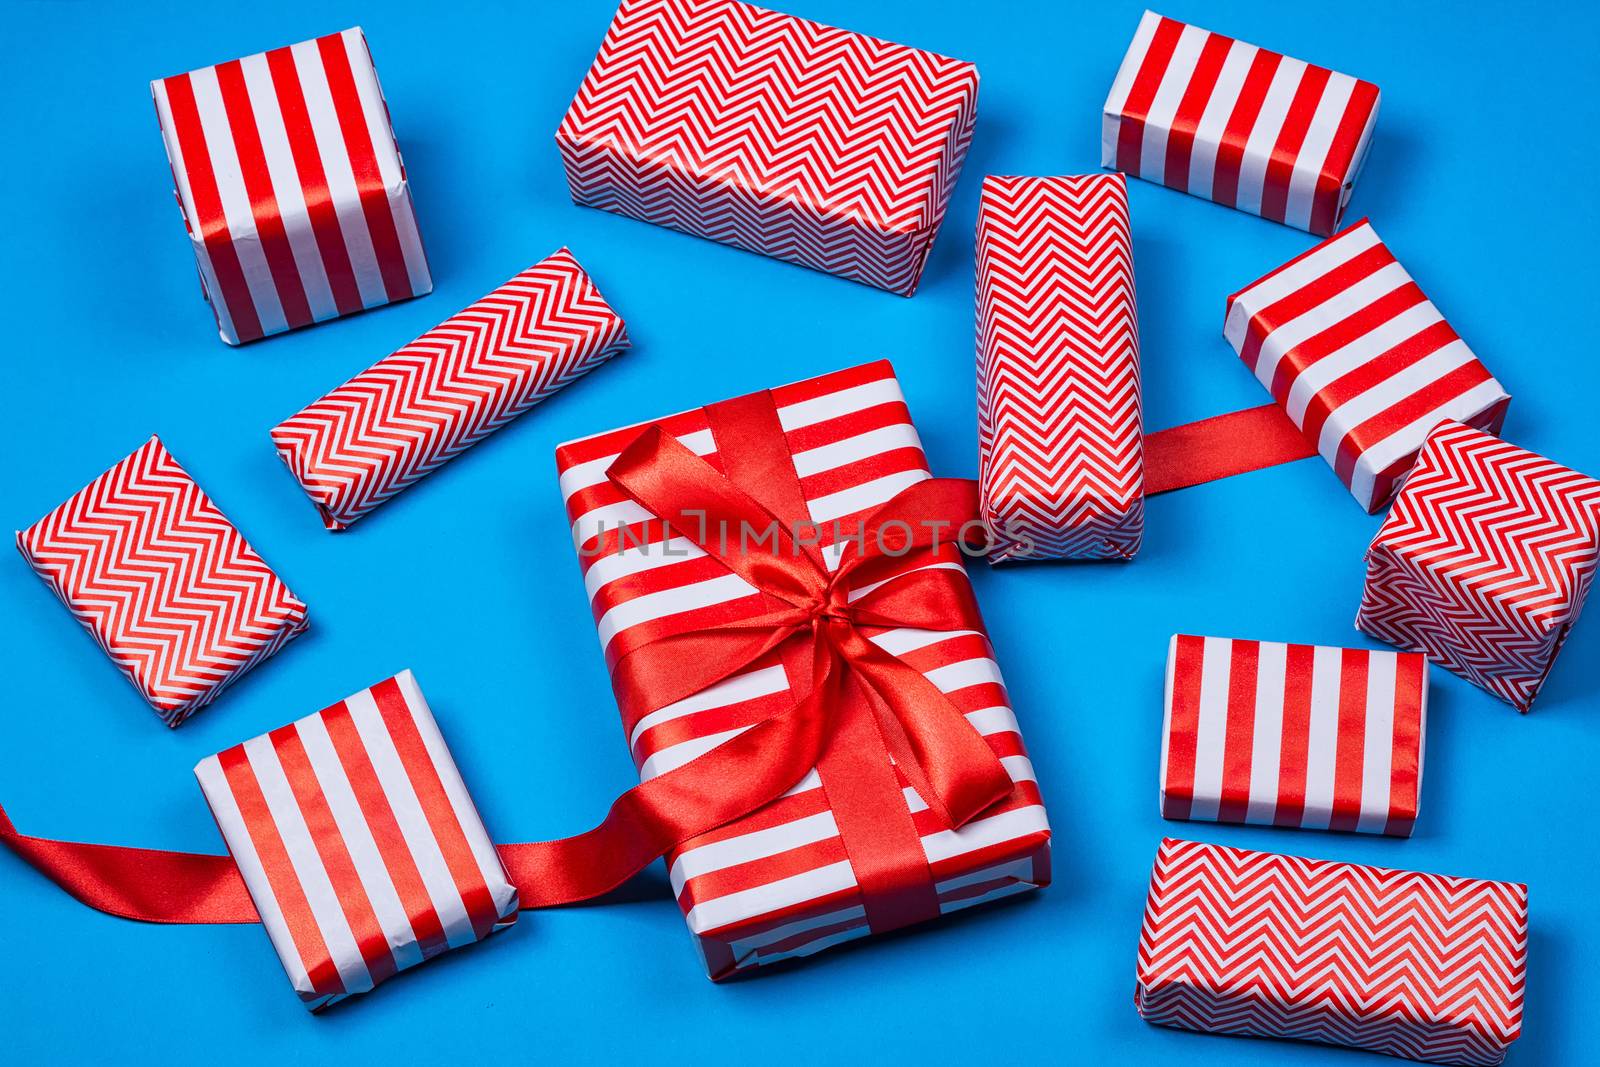 Top view of red and white gifts on the blue background